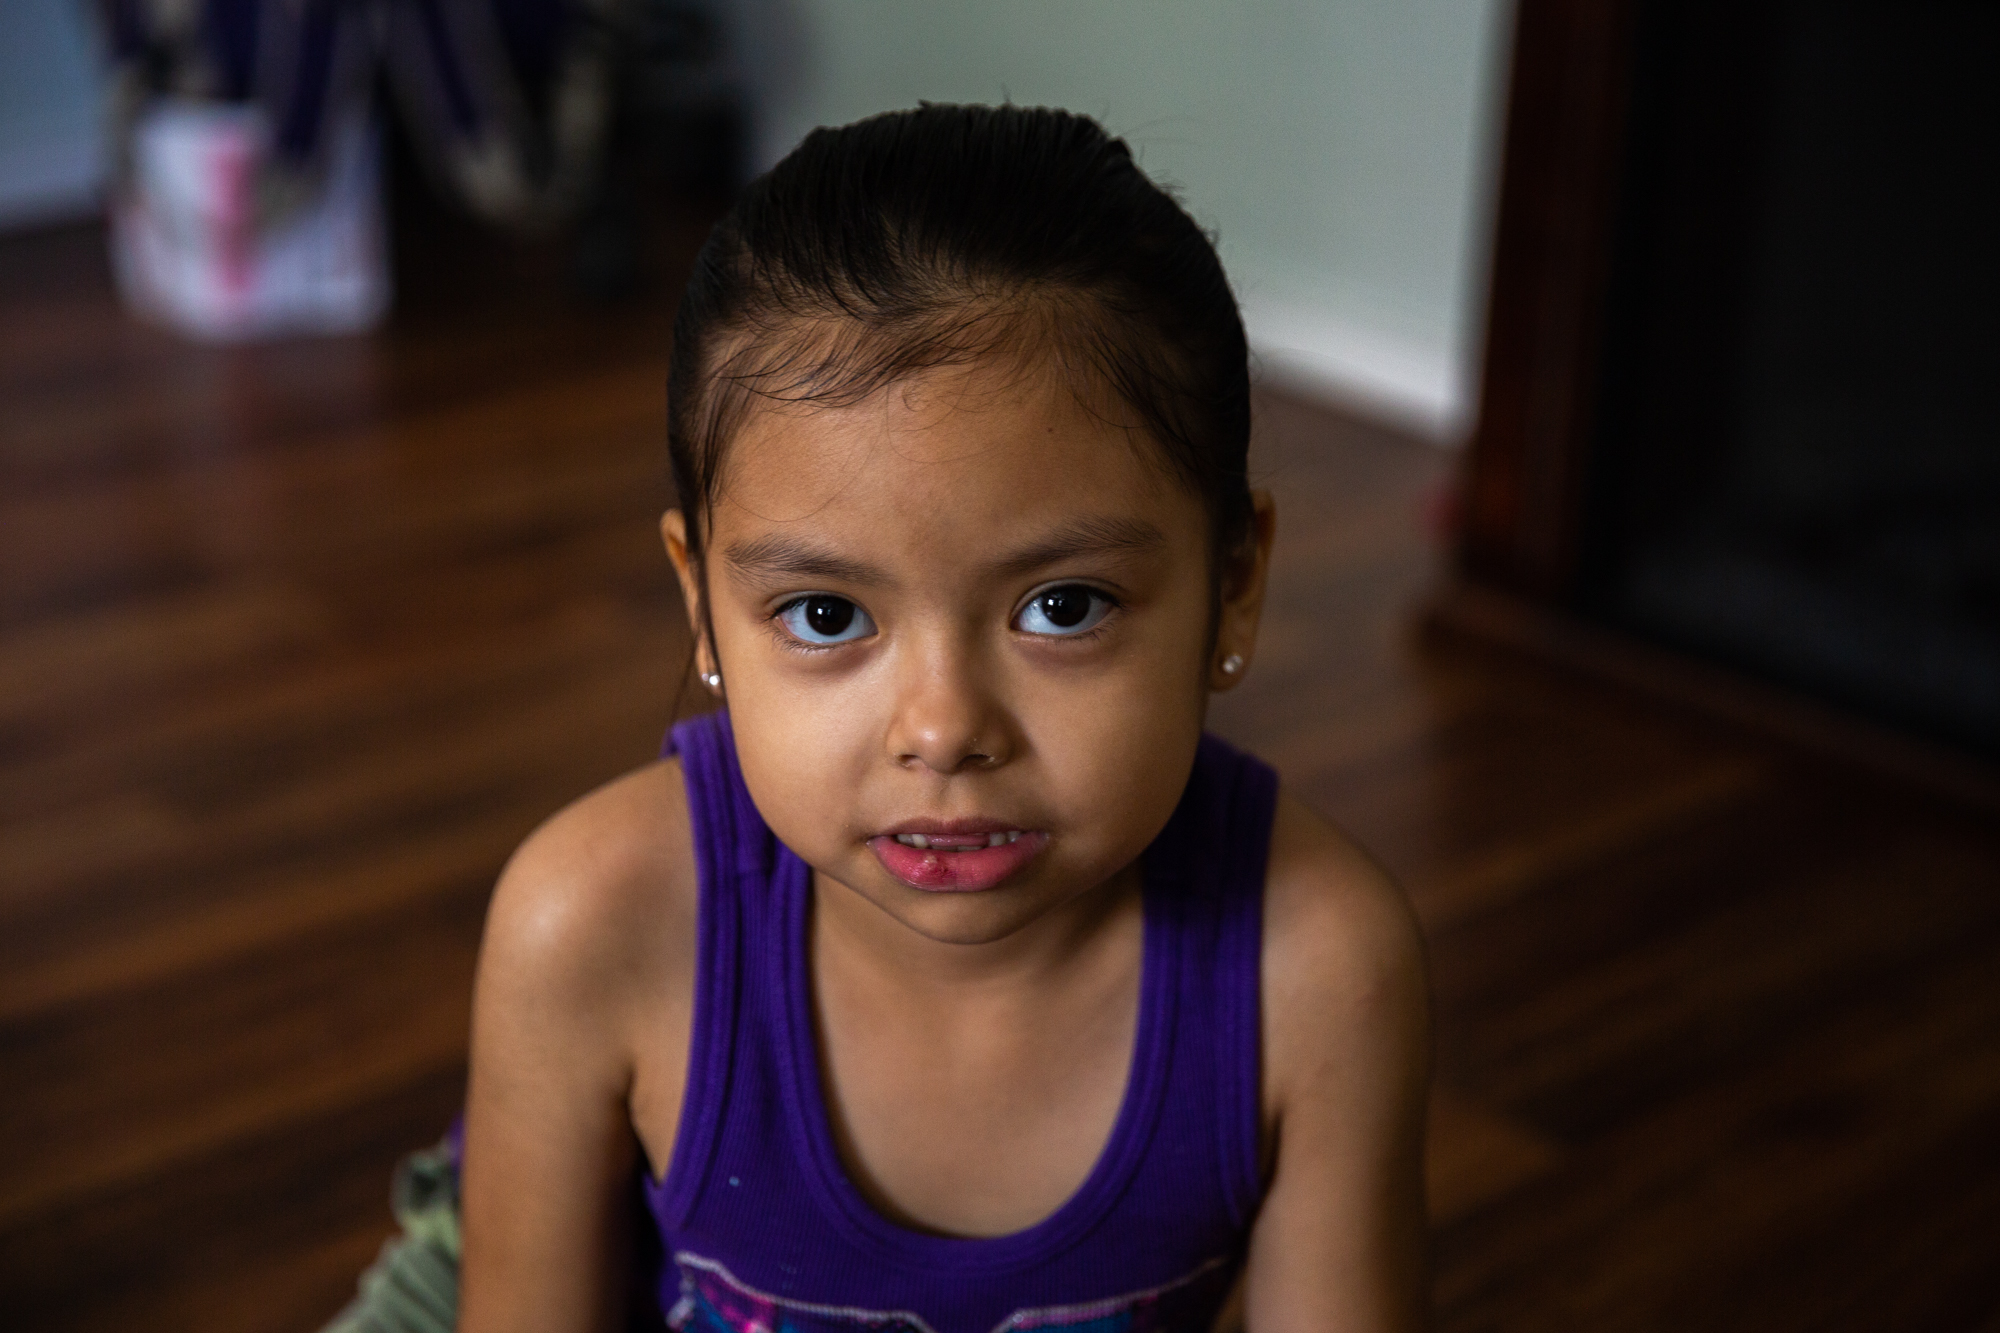 Ester Escobedo - Ester Escobedo's mother, Ruth Escobedo, worries that the poor condition of her house will negatively affect the health of her two daughters, Ester, 6, and Mia, 1. Hurricane Harvey damaged the foundation and left behind mold, cracked floorboards and uneven concrete pathways. (Rachel Farrell/News21)